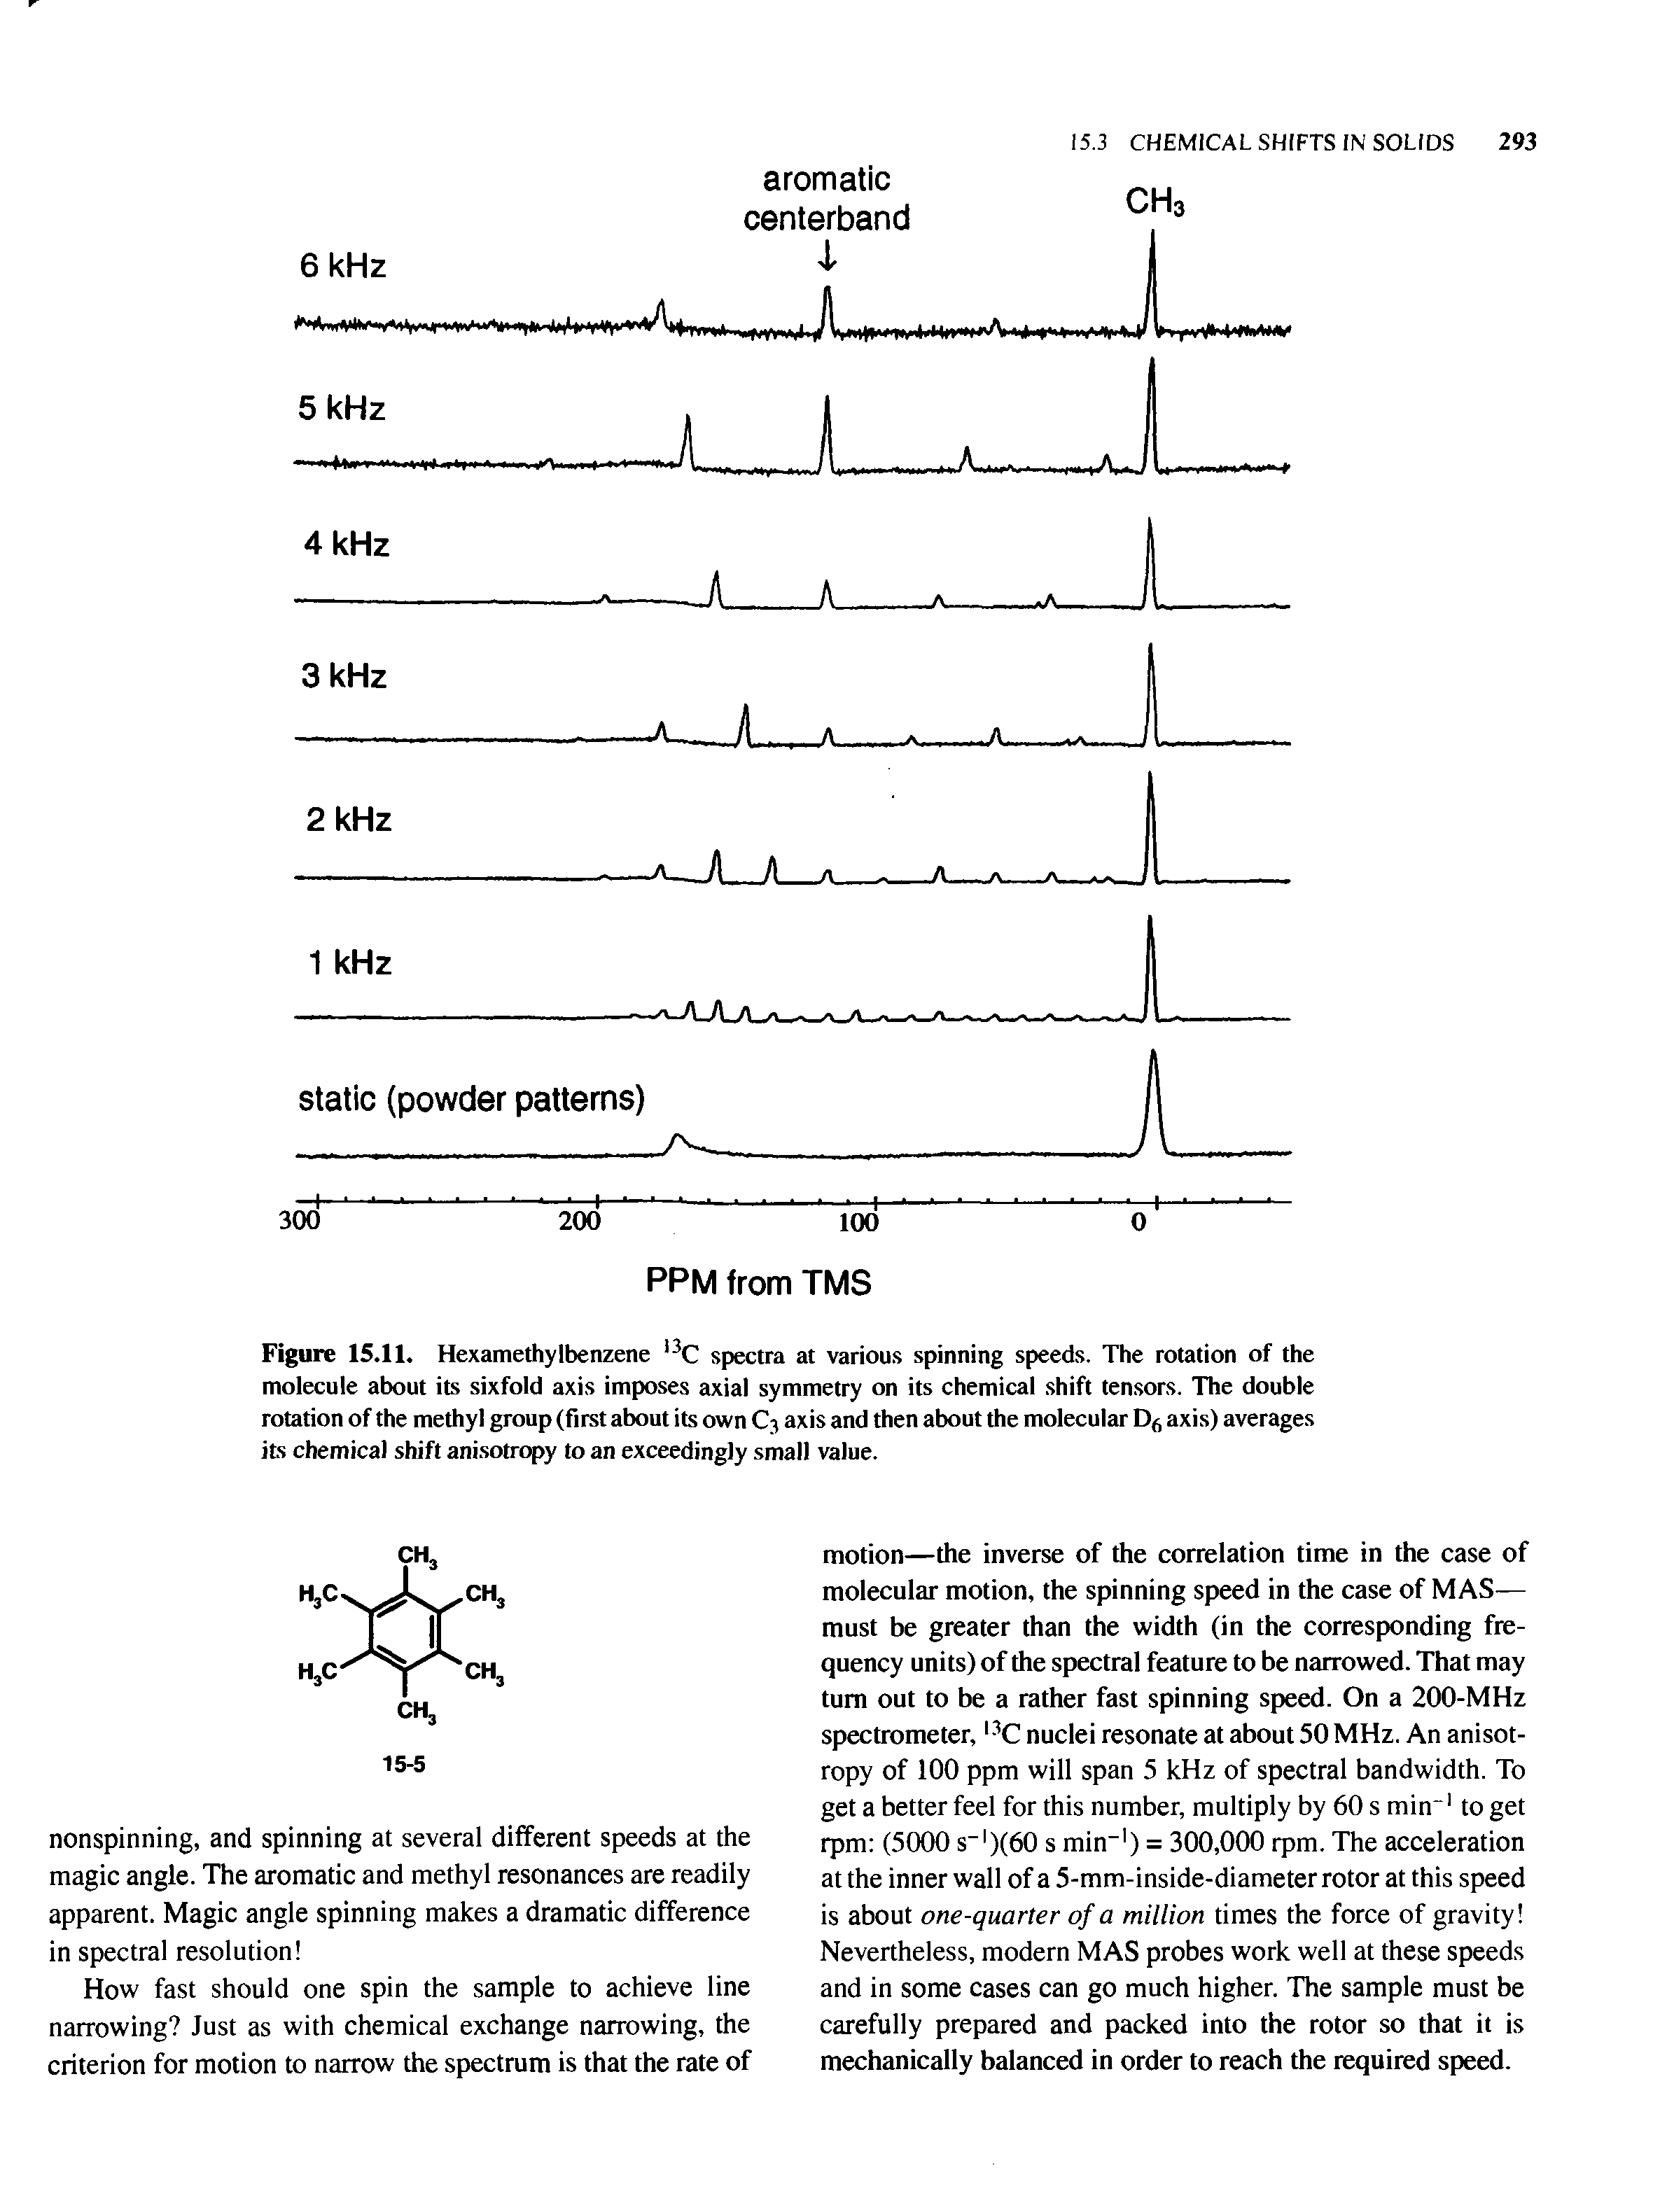 Figure 15.11. Hexamethylbenzene l3C spectra at various spinning speeds. The rotation of the molecule about its sixfold axis imposes axial symmetry on its chemical shift tensors. The double rotation of the methyl group (first about its own C3 axis and then about the molecular D6 axis) averages its chemical shift anisotropy to an exceedingly small value.